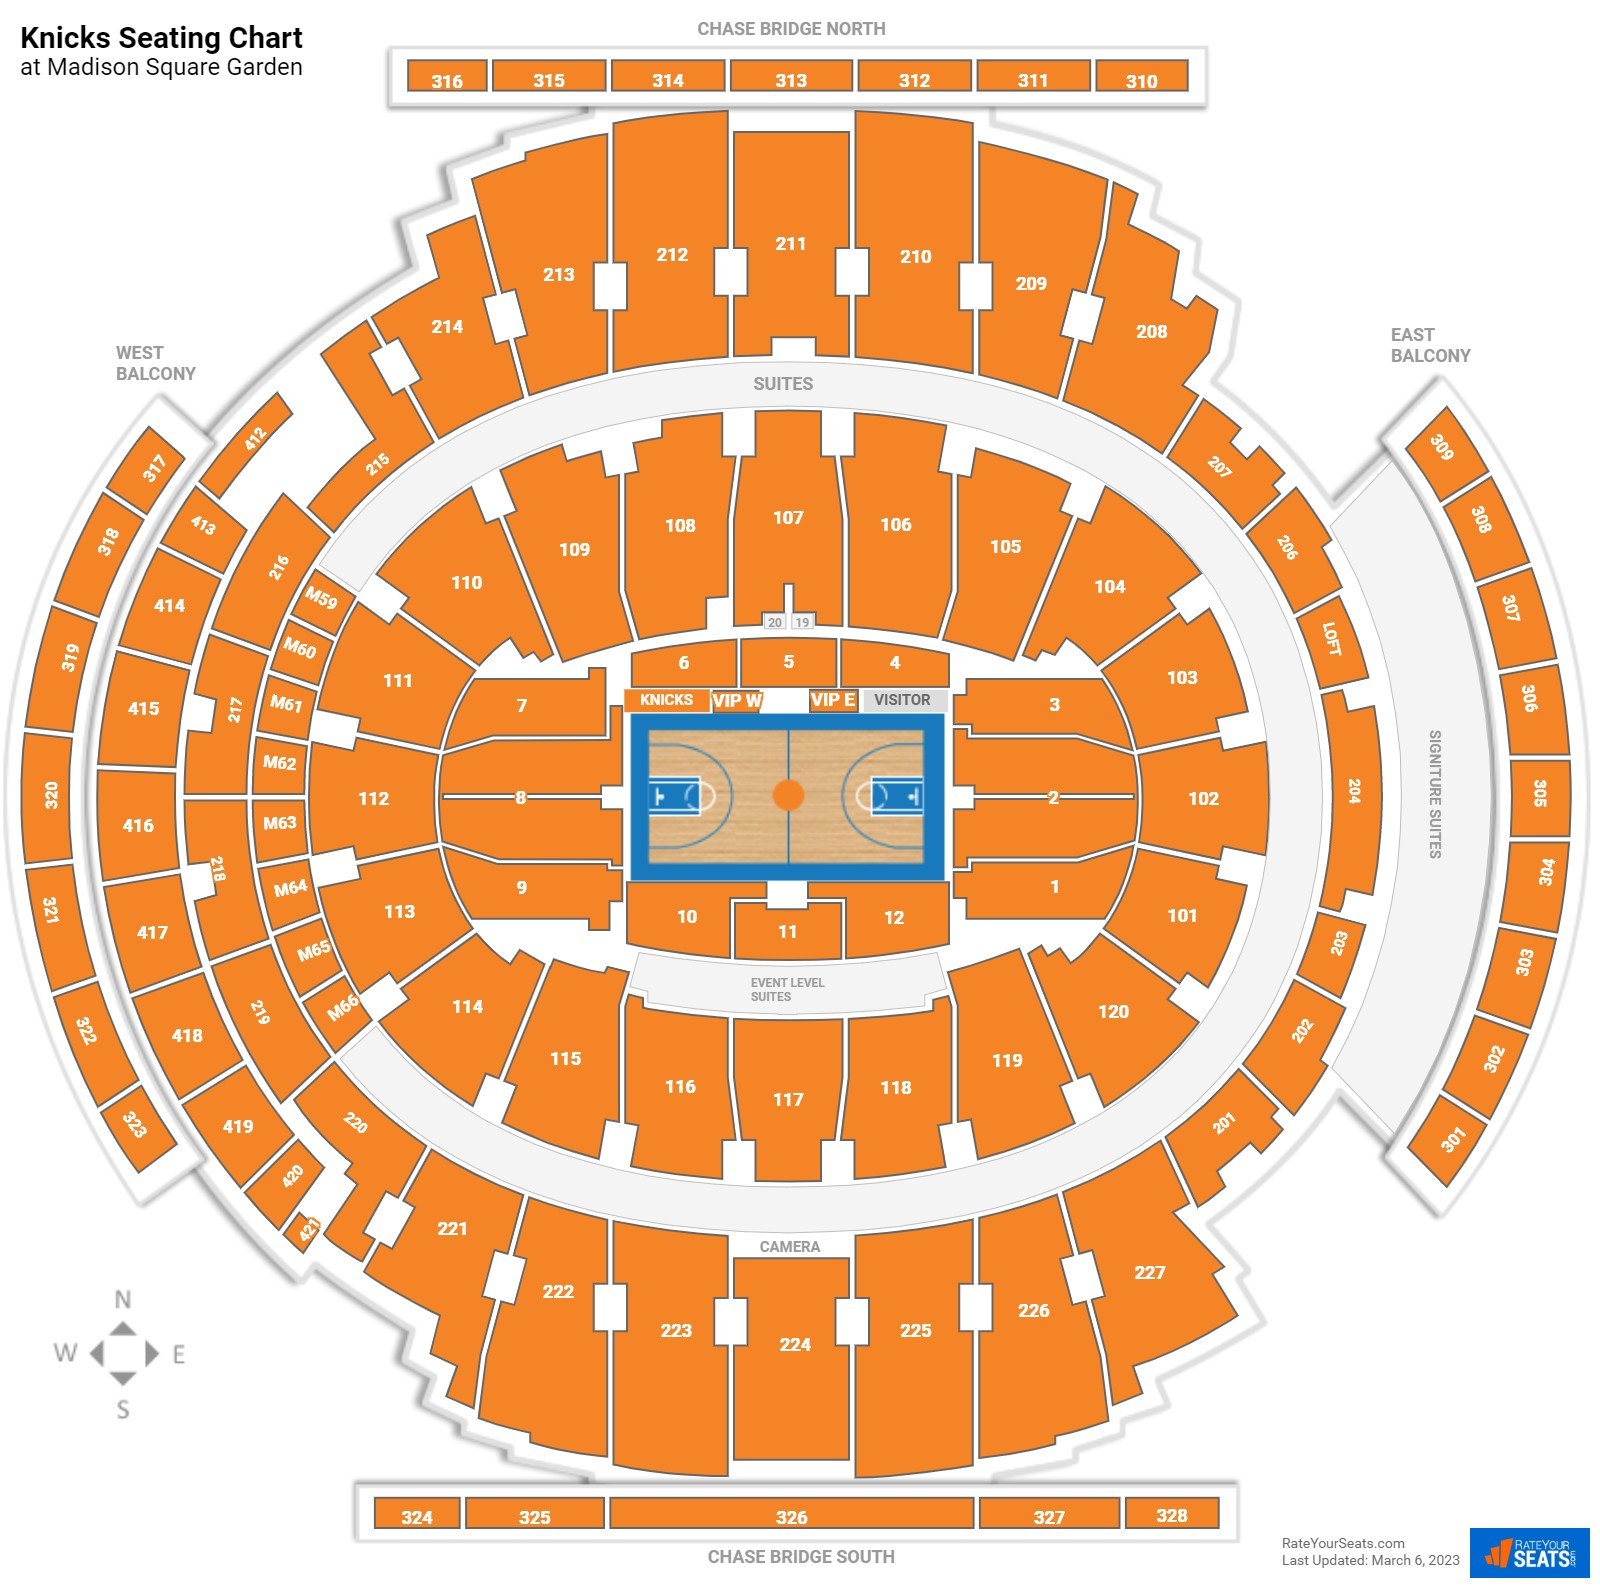 New York Knicks Seating Chart at Madison Square Garden